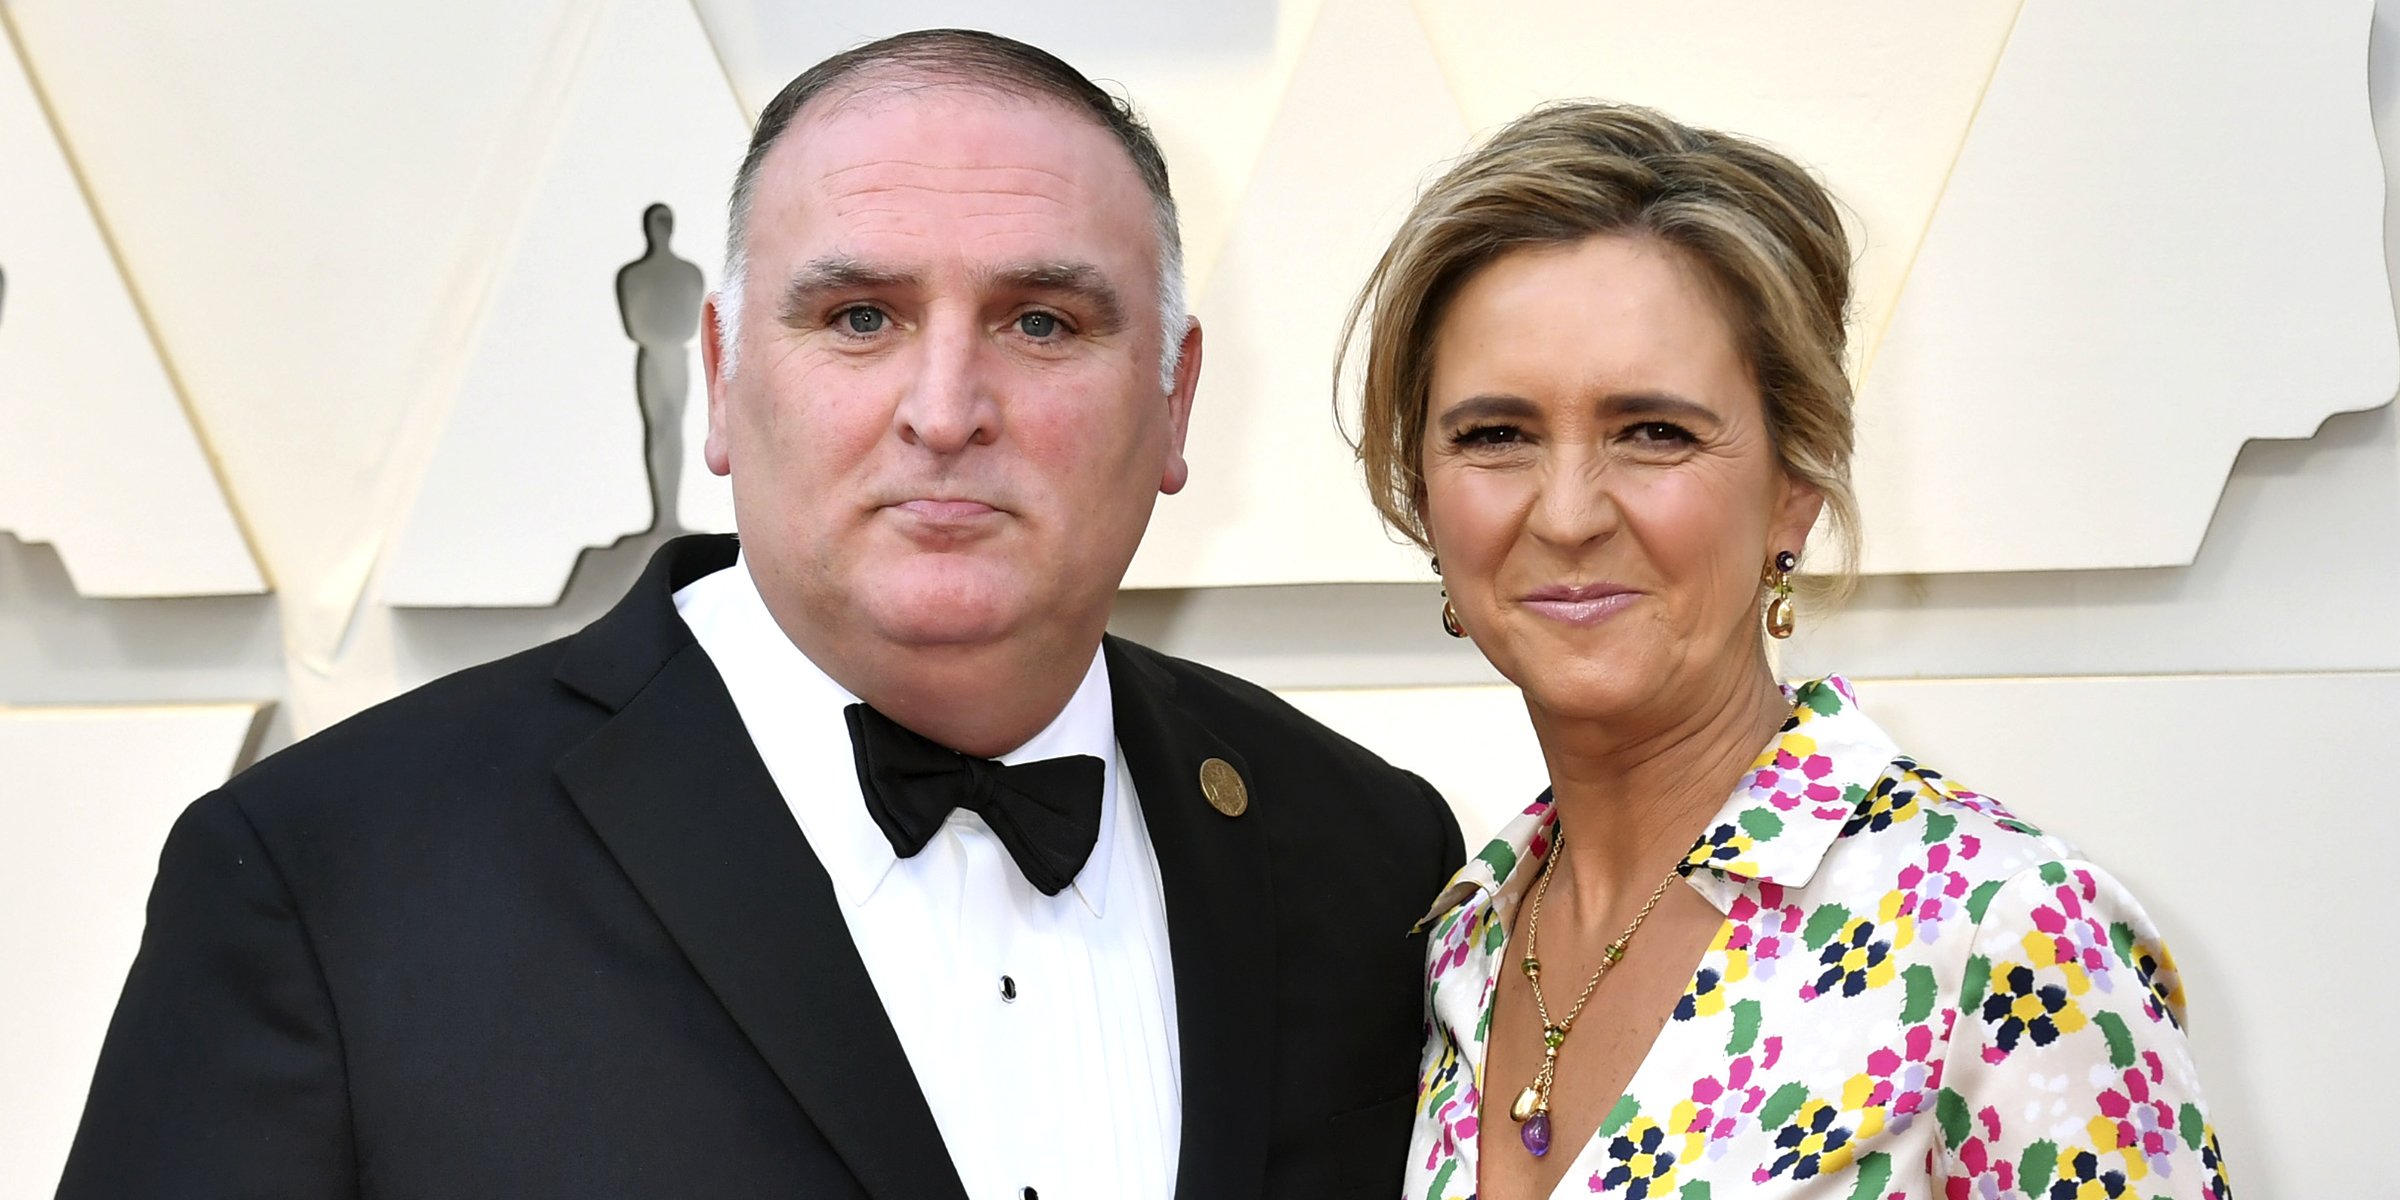 José Andrés and Patricia Andres | Source: Getty Images